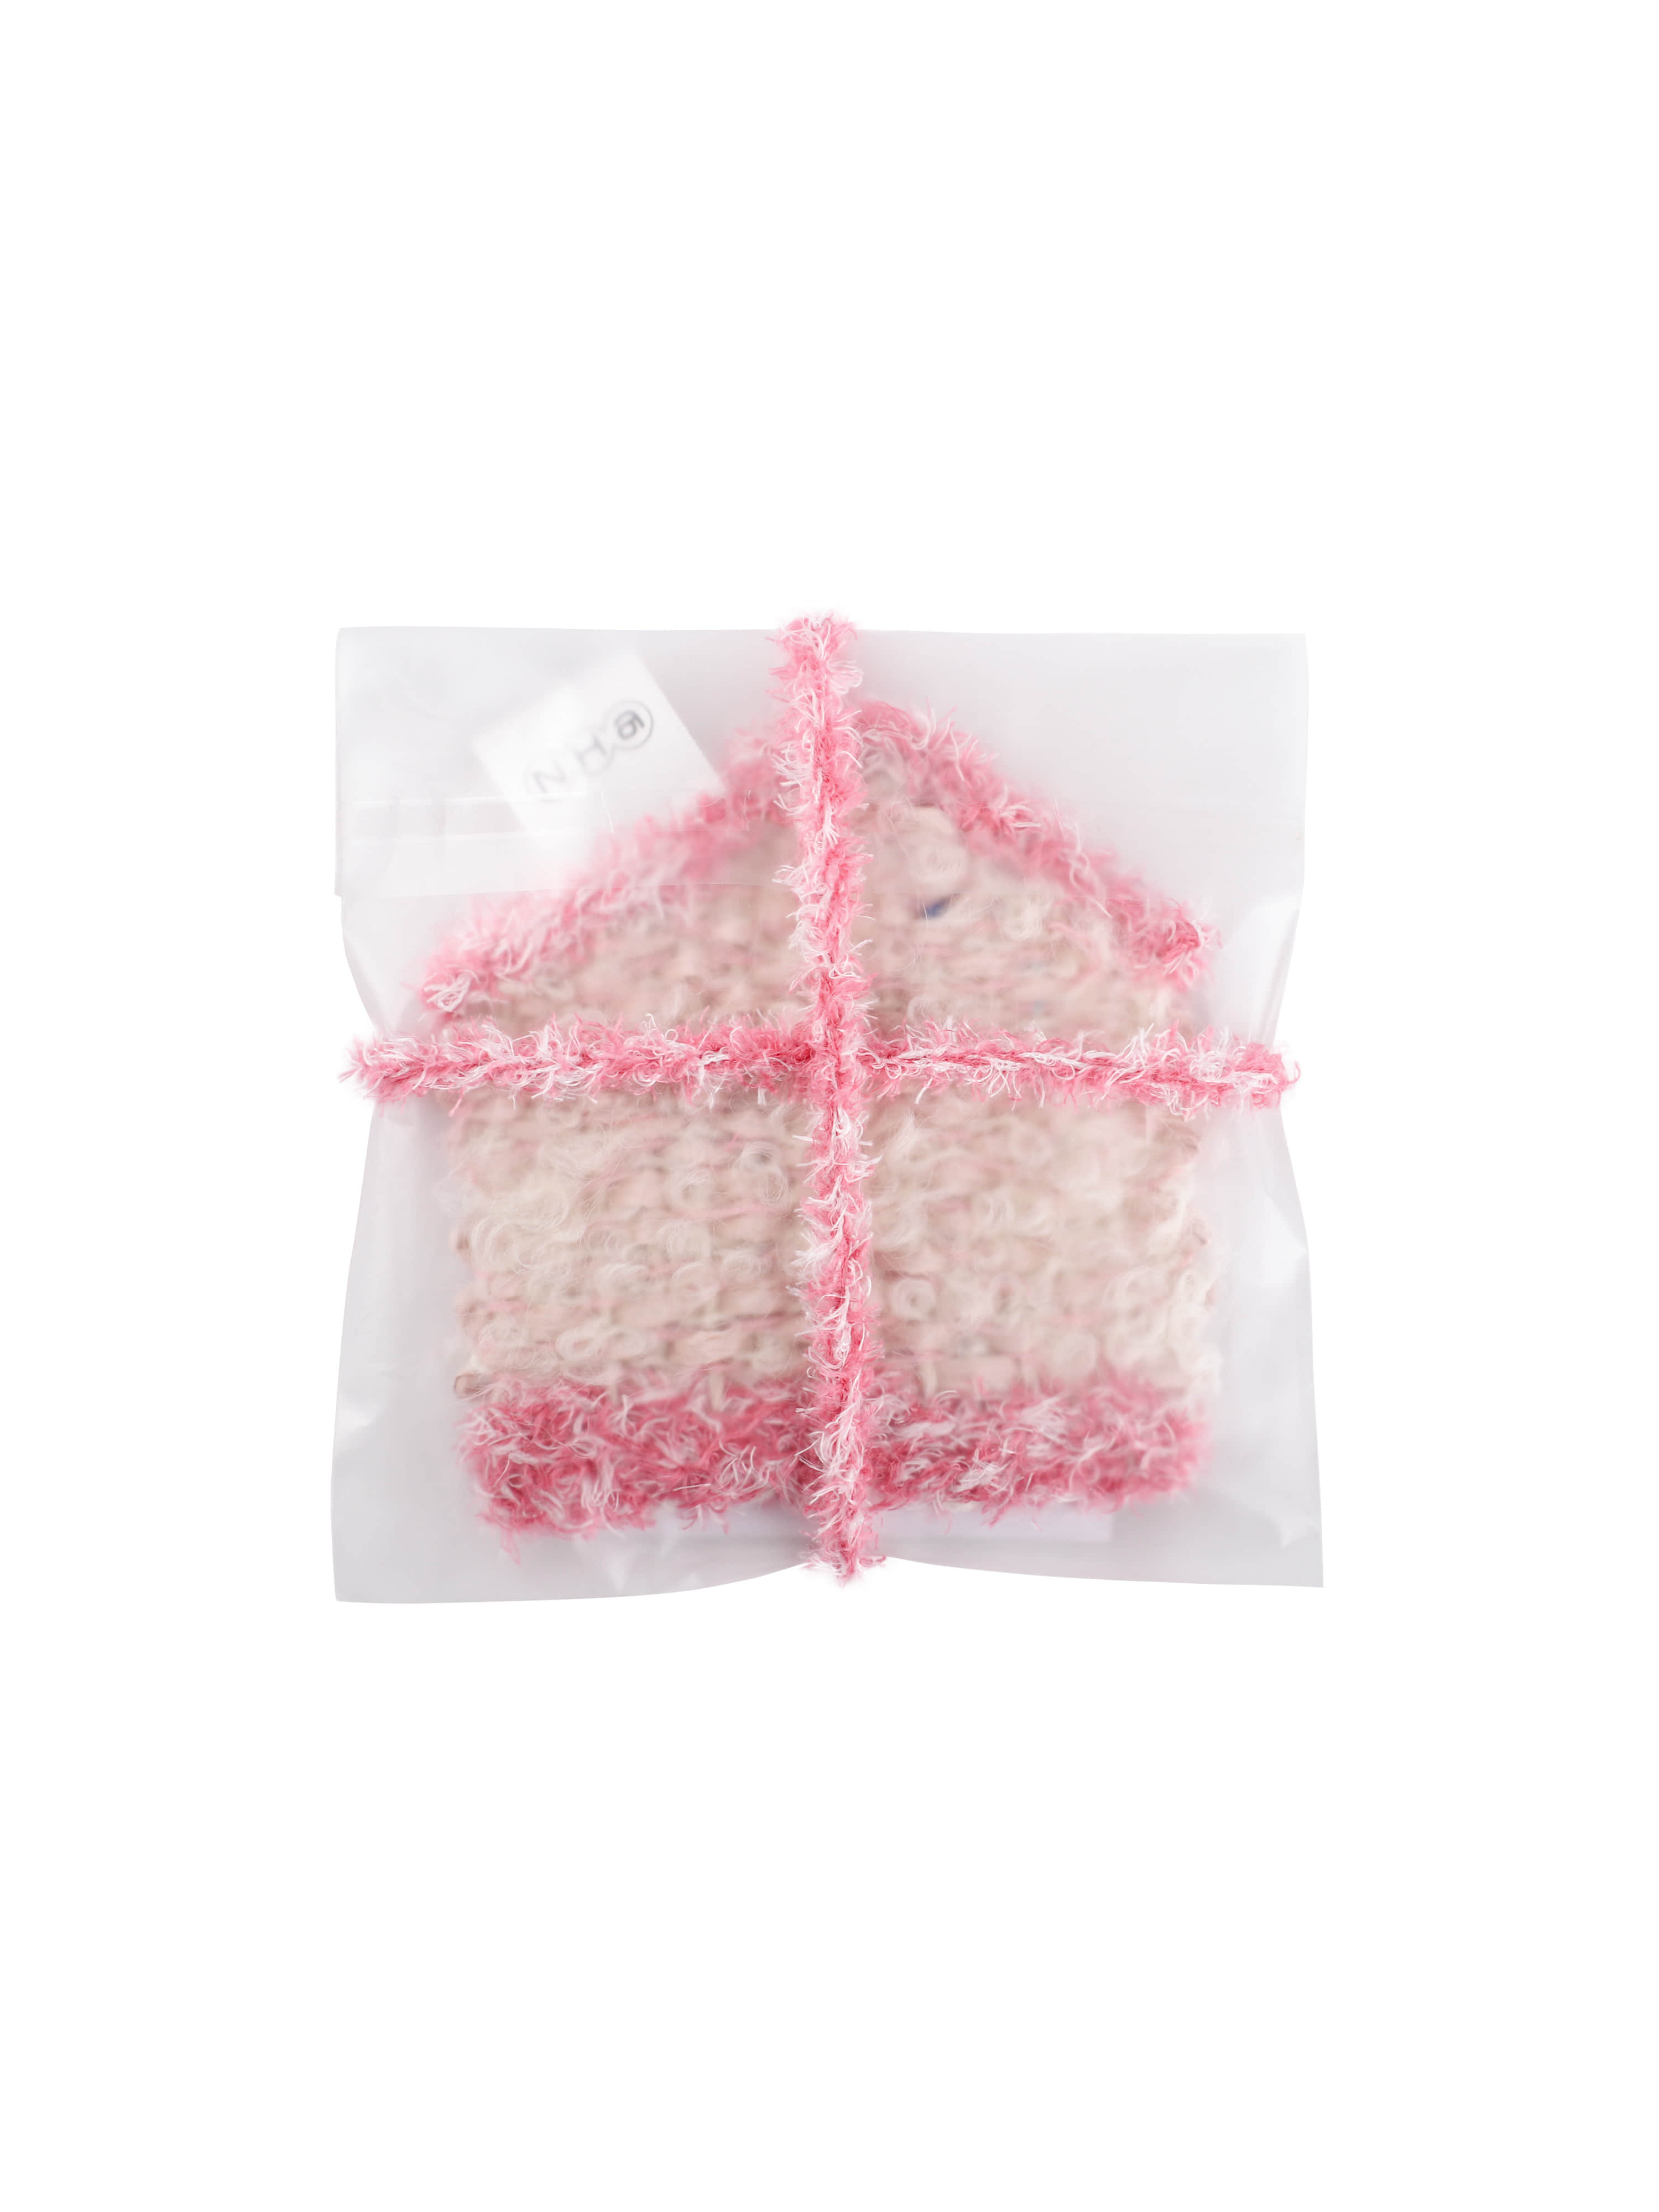 Crooked House Coaster - Pink